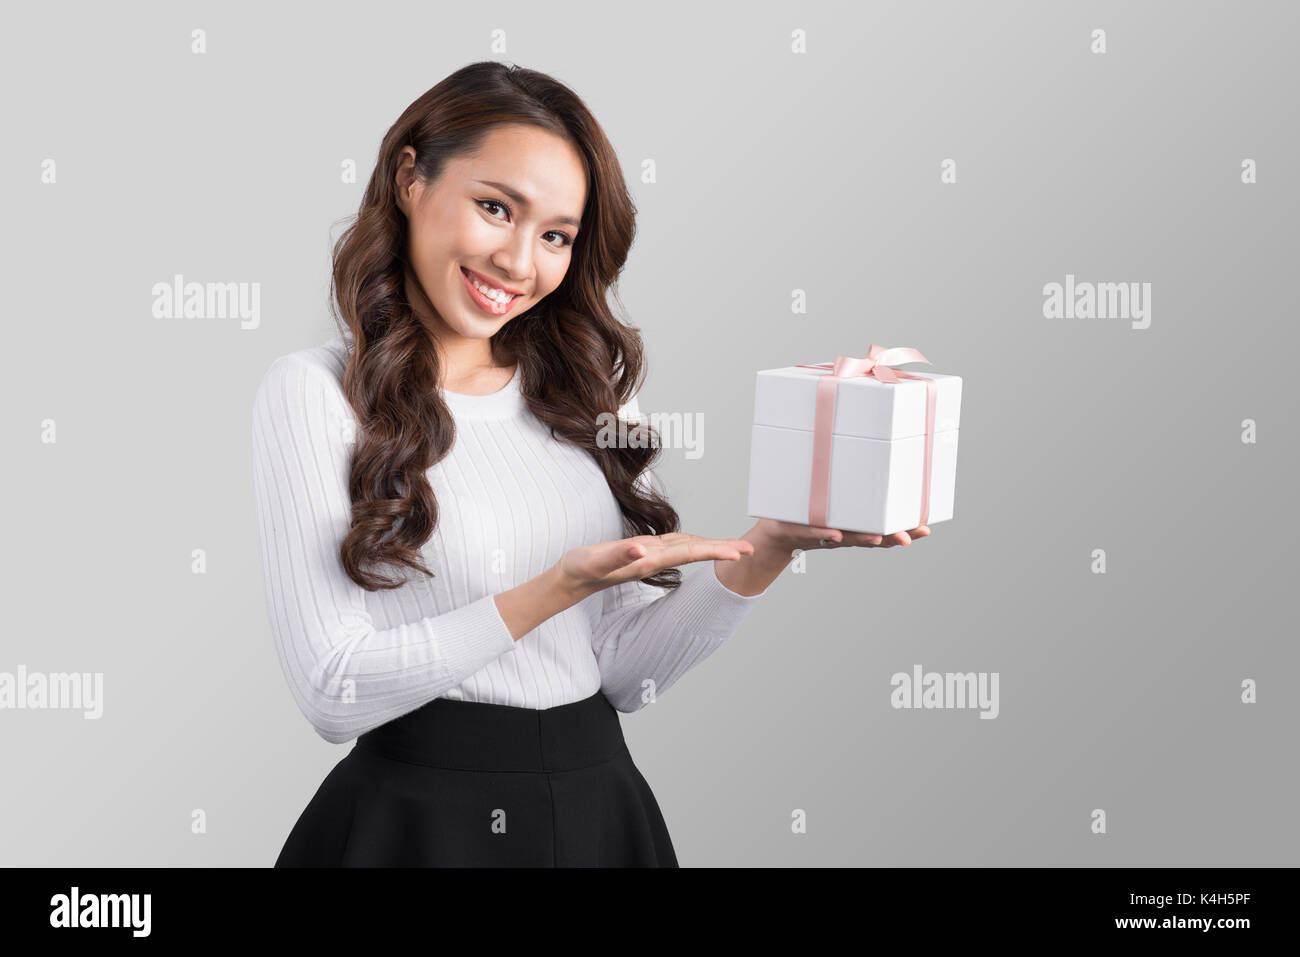 Pretty young asian woman holding gift box Stock Photo